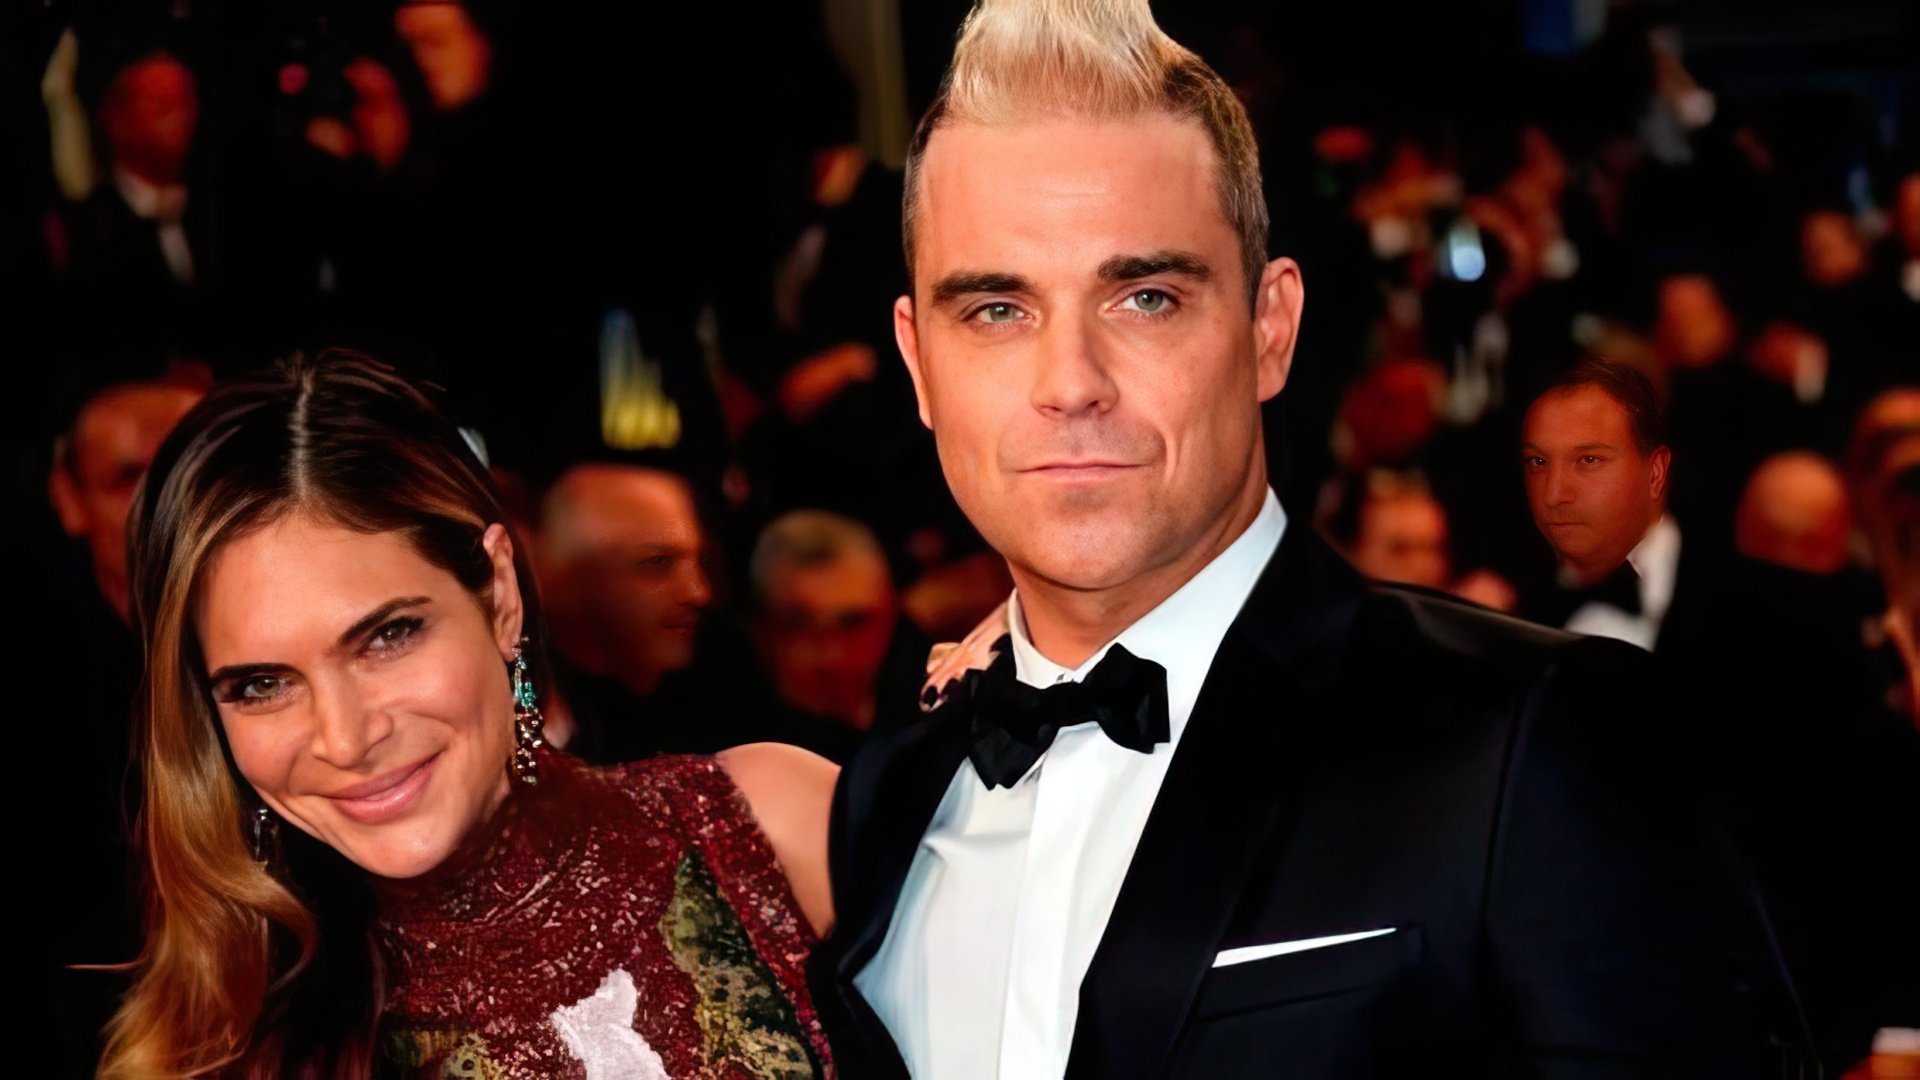 Robbie Williams is happily married to Ayda Field